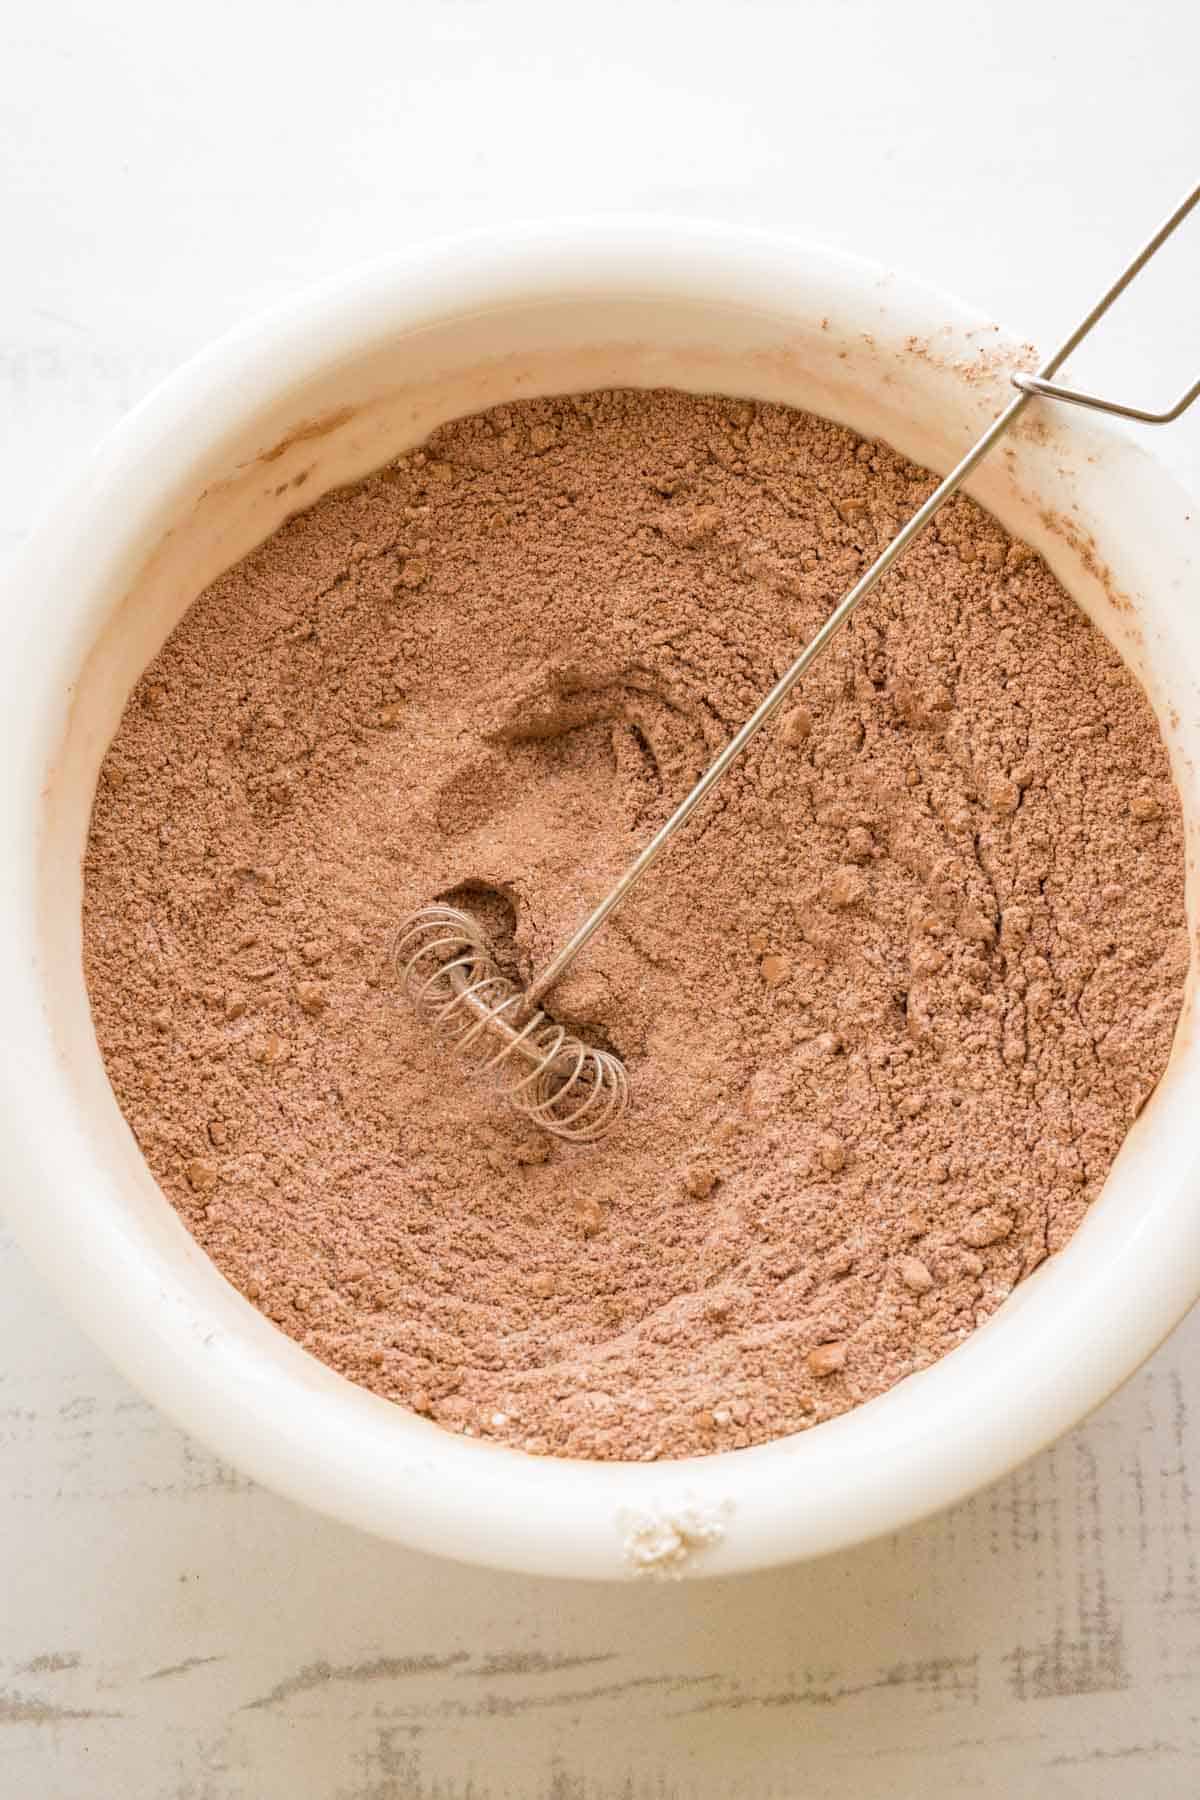 Cocoa, sugar, baking powder, and salt whisked together in a large mixing bowl.